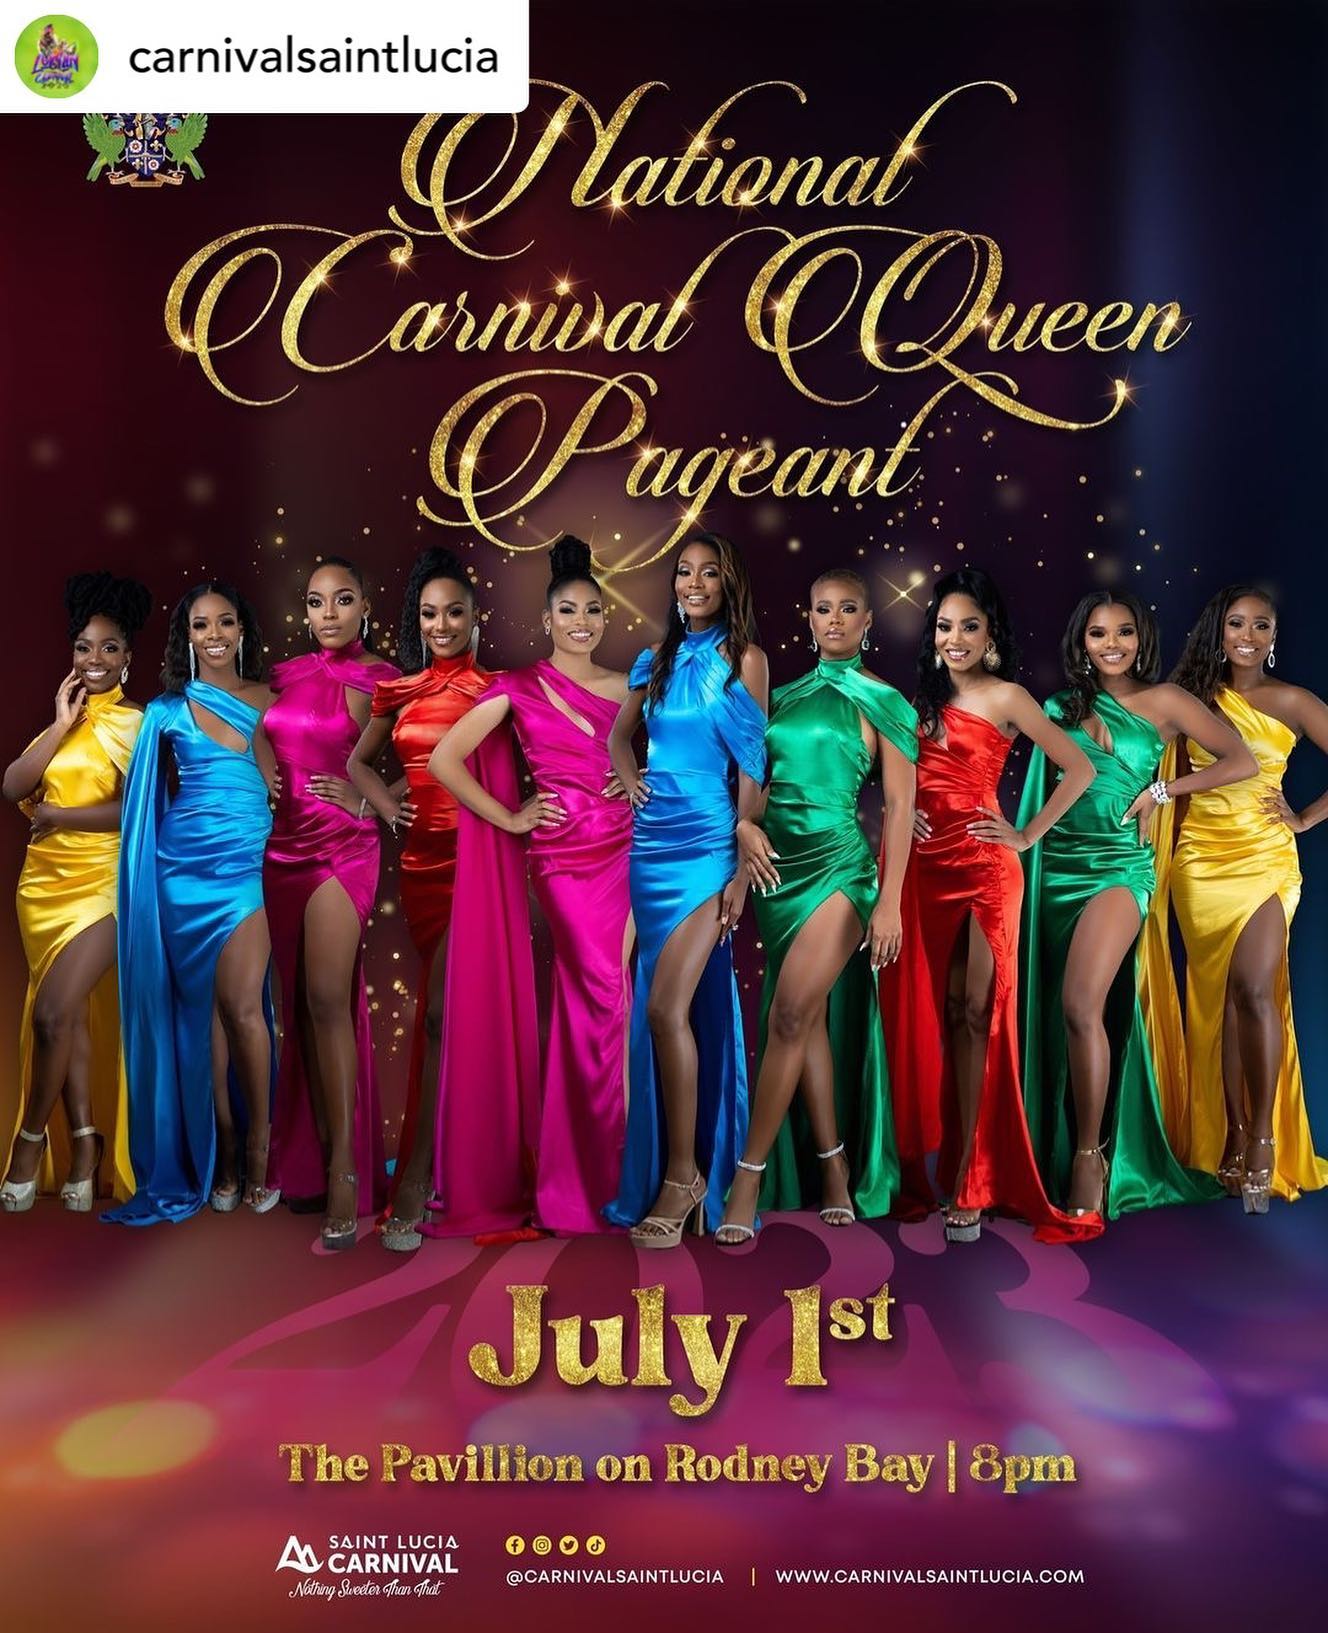 Beauty, Elegance and Talent when combined produces the most glamorous and extravagant affair for Saint Lucia Carnival 2023⁠.
⁠
Ten contestants from all over Saint Lucia, each brining a different energy will vie for the title of Miss Carnival Queen 2023.⁠
⁠
The Pavilion on Rodney Bay will come alive on July 1st for an evening fit for royalty.⁠
⁠
July 1st 2023⁠ at 8:00 pm⁠
The Pavilion on Rodney Bay⁠
⁠🎟️ $150 Per Person | Available at The Cell Outlets Islandwide⁠
⁠
⁠
__________⁠
SAINT LUCIA CARNIVAL 2023 ⁠
 July 1-19 2023⁠
Nothing Sweeter Than That 🇱🇨 ⁠
⁠
Not For One But For All ⁠
⁠
⁠
#2023carnival⁠
—-⁠
@eventssaintlucia @caribcation @exportsaintlucia @cdfsaintlucia @travelsaintlucia